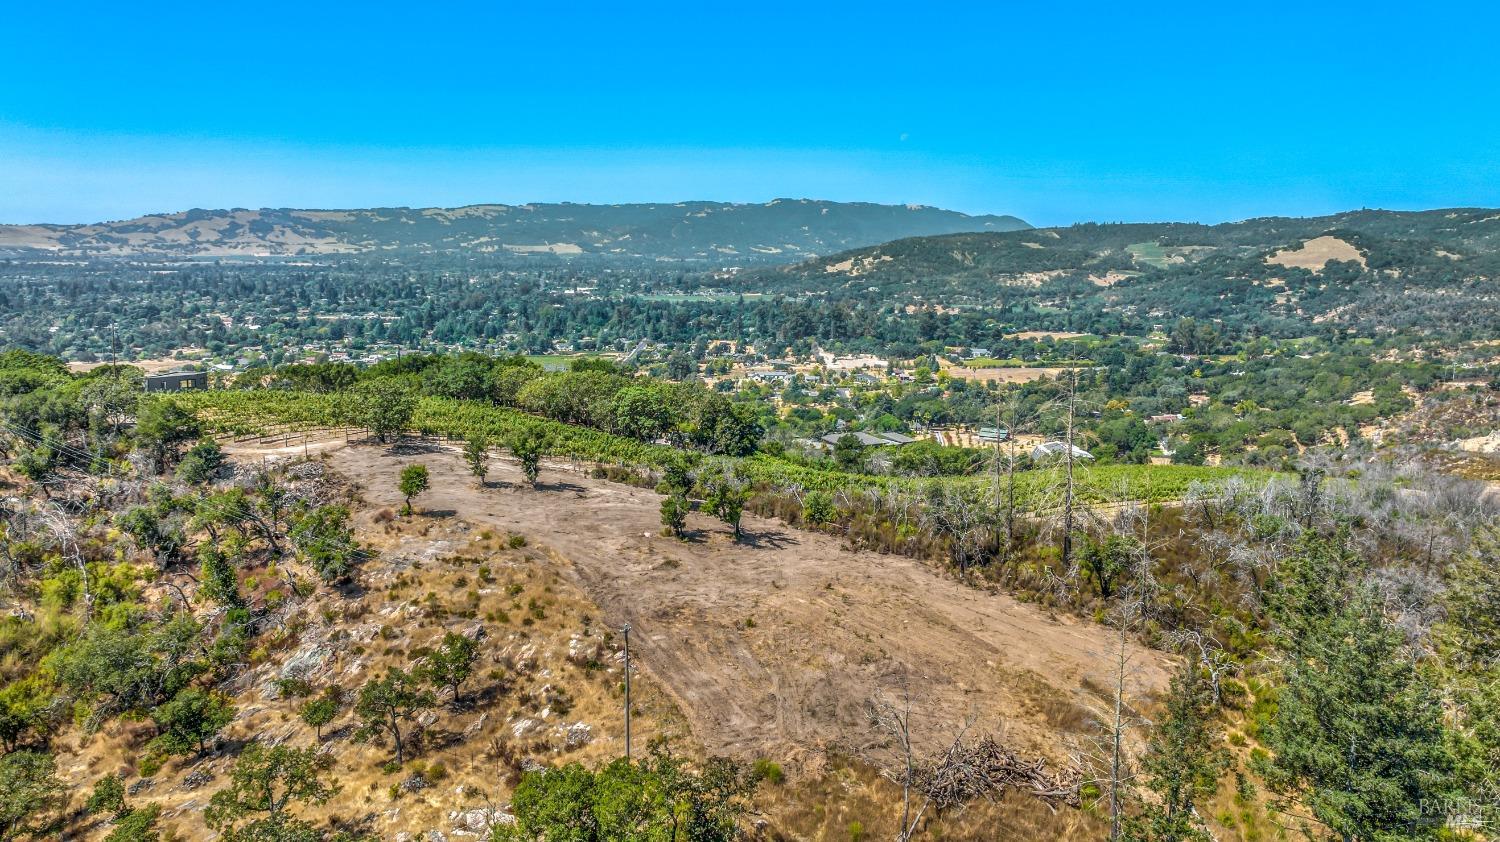 Rare east side Sonoma building parcel with a cleared view building site, almost 360' wine country views. Installed 20+- gpm well and electricity, 3-bedroom vested septic design. The land has a newer 4-stall barn, an arena, hay storage, 3 corrals; also two storage containers currently a tack room and storage. A gated entry accesses the fenced 5.25+- acres with native oaks and a charming seasonal stream. Highly desireble location with a serene country feel just minutes to downtown Sonoma, 1+ hour to San Francisco.